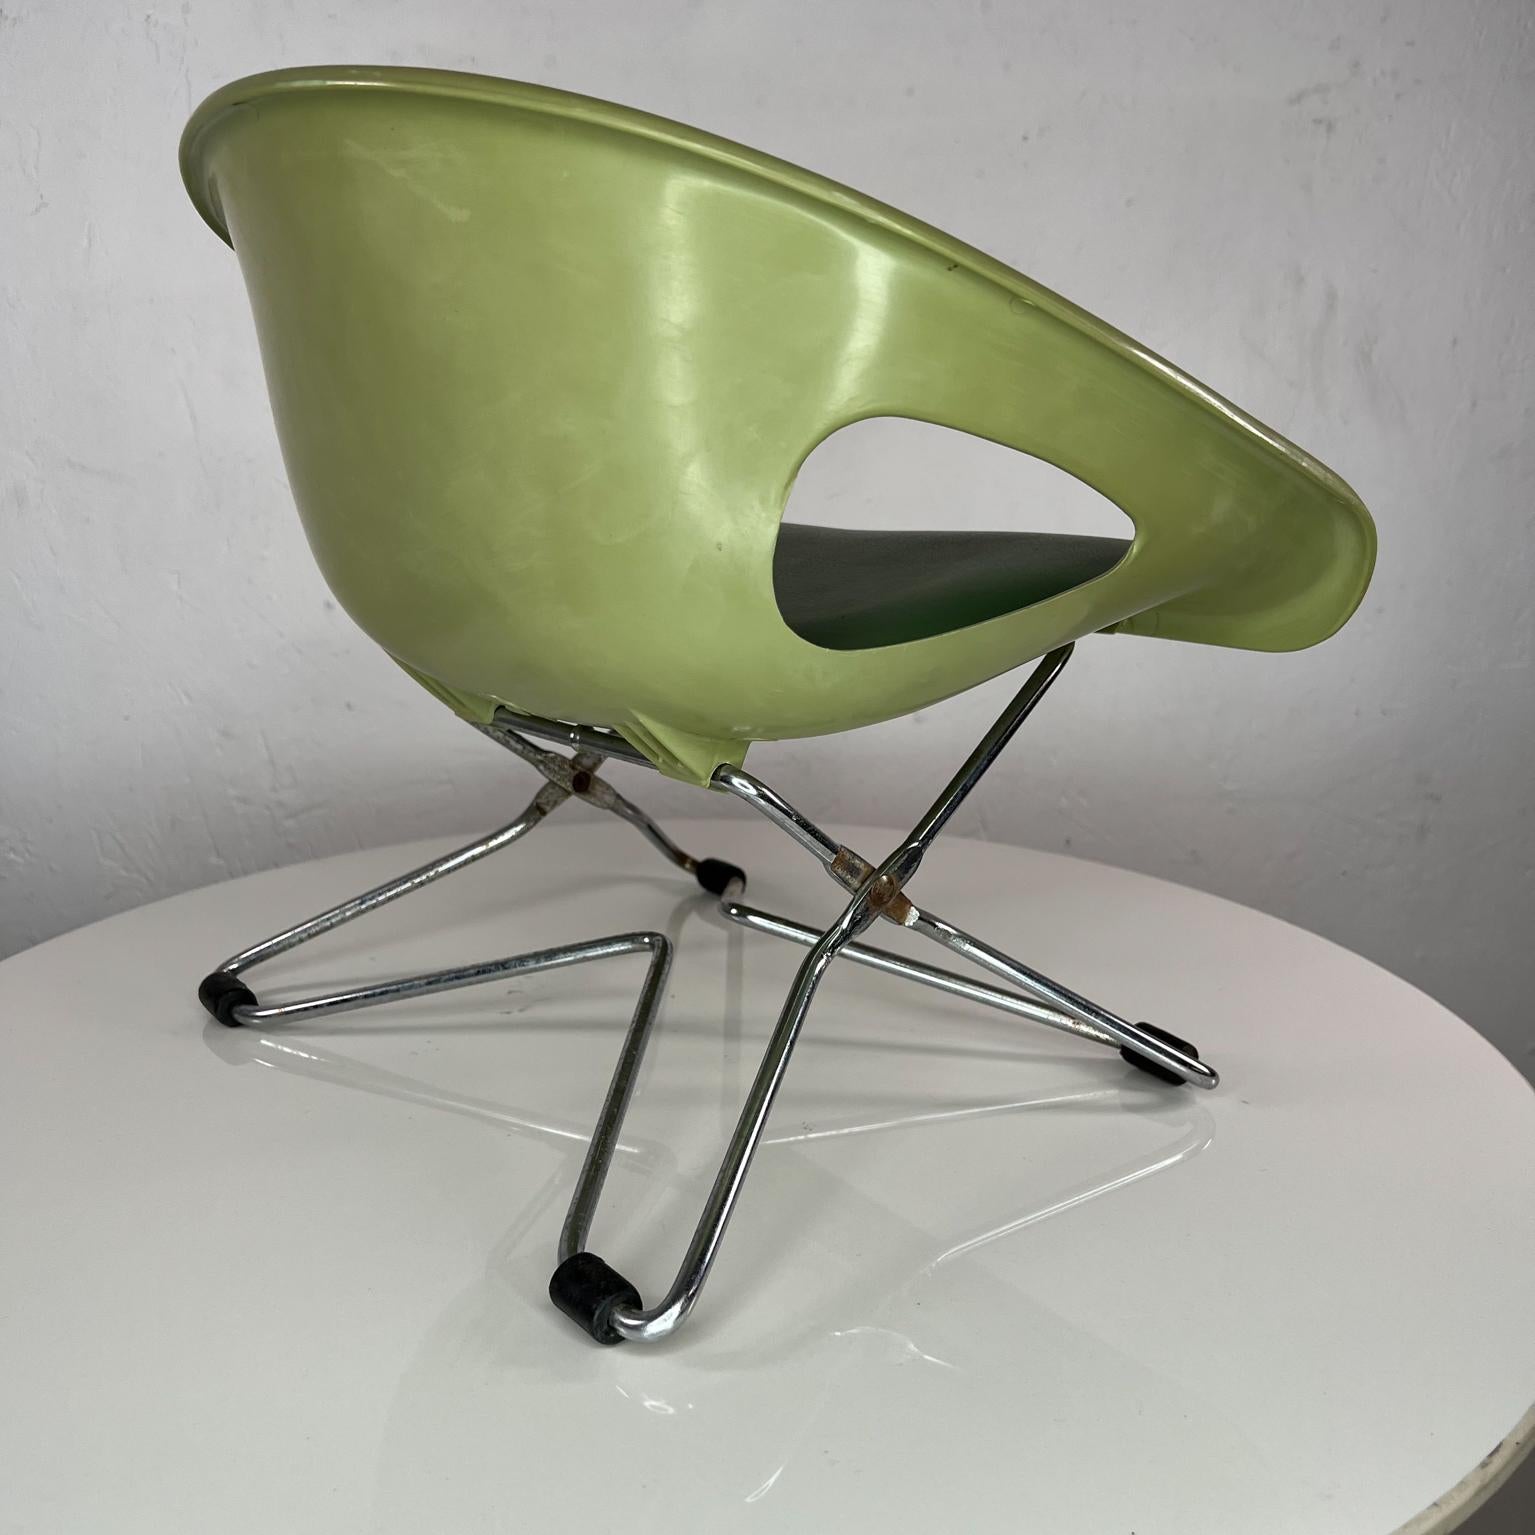 Mid-Century Modern 1960s Mid Century Child's Booster Seat Chair Avocado Green by Cosco Indiana